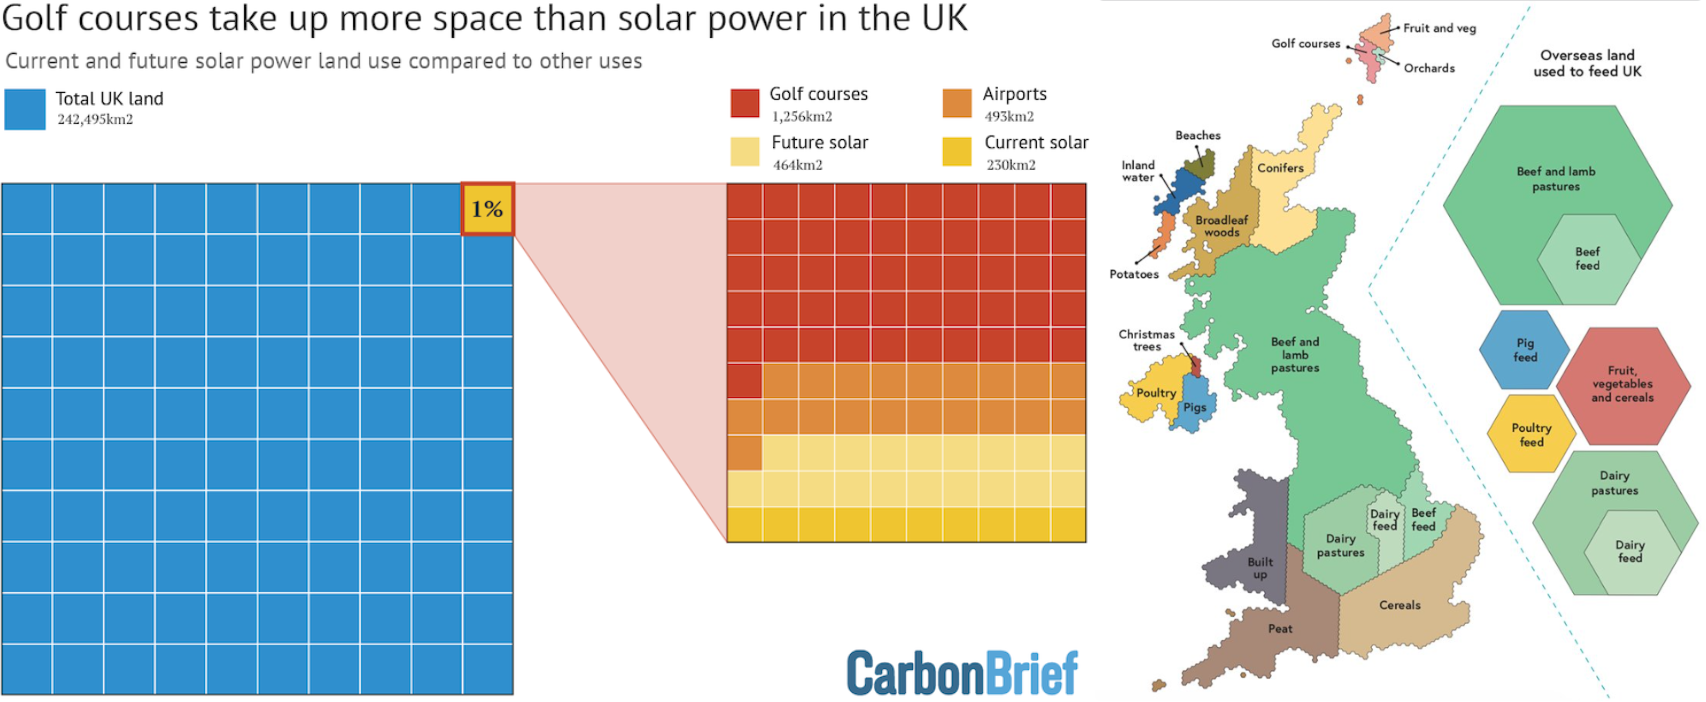 Solar power is a threat to UK farmland and food production 